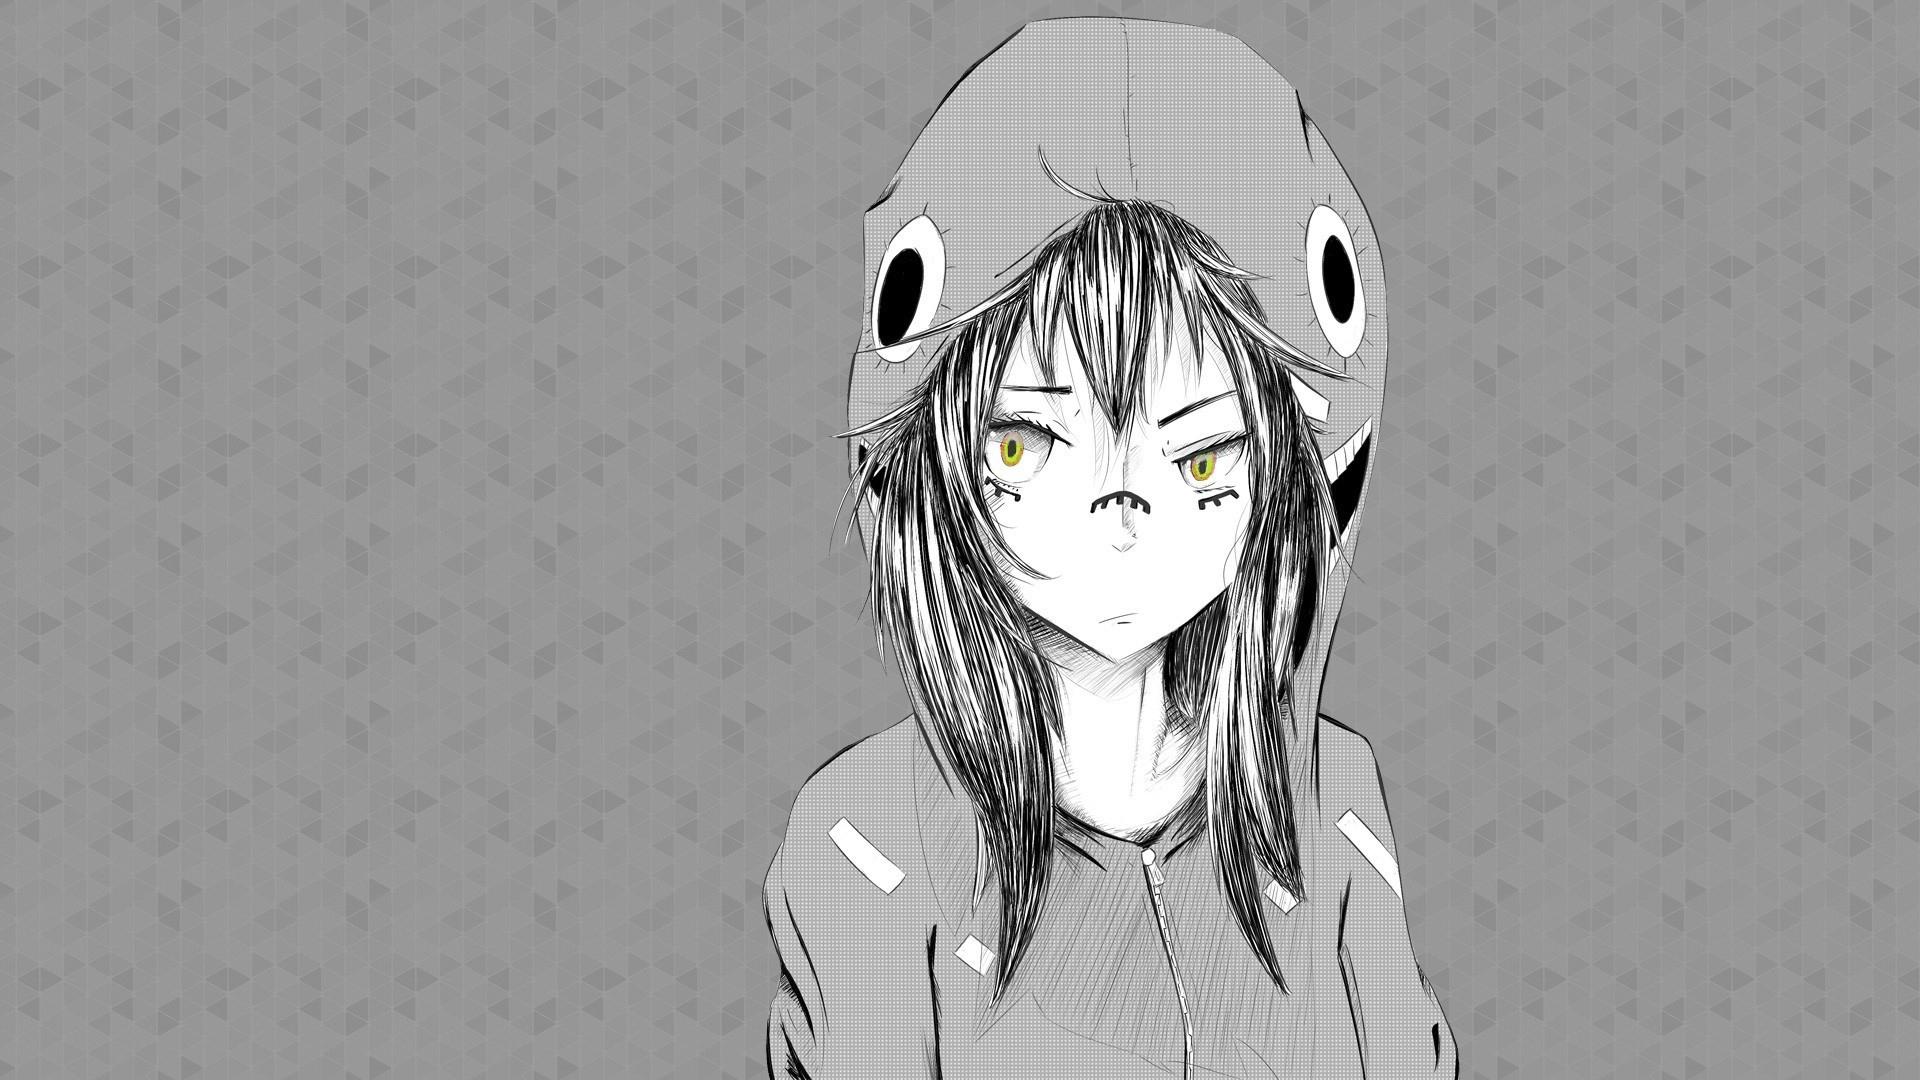 Download wallpaper 1920x1080 anime, girl, graphic, hat